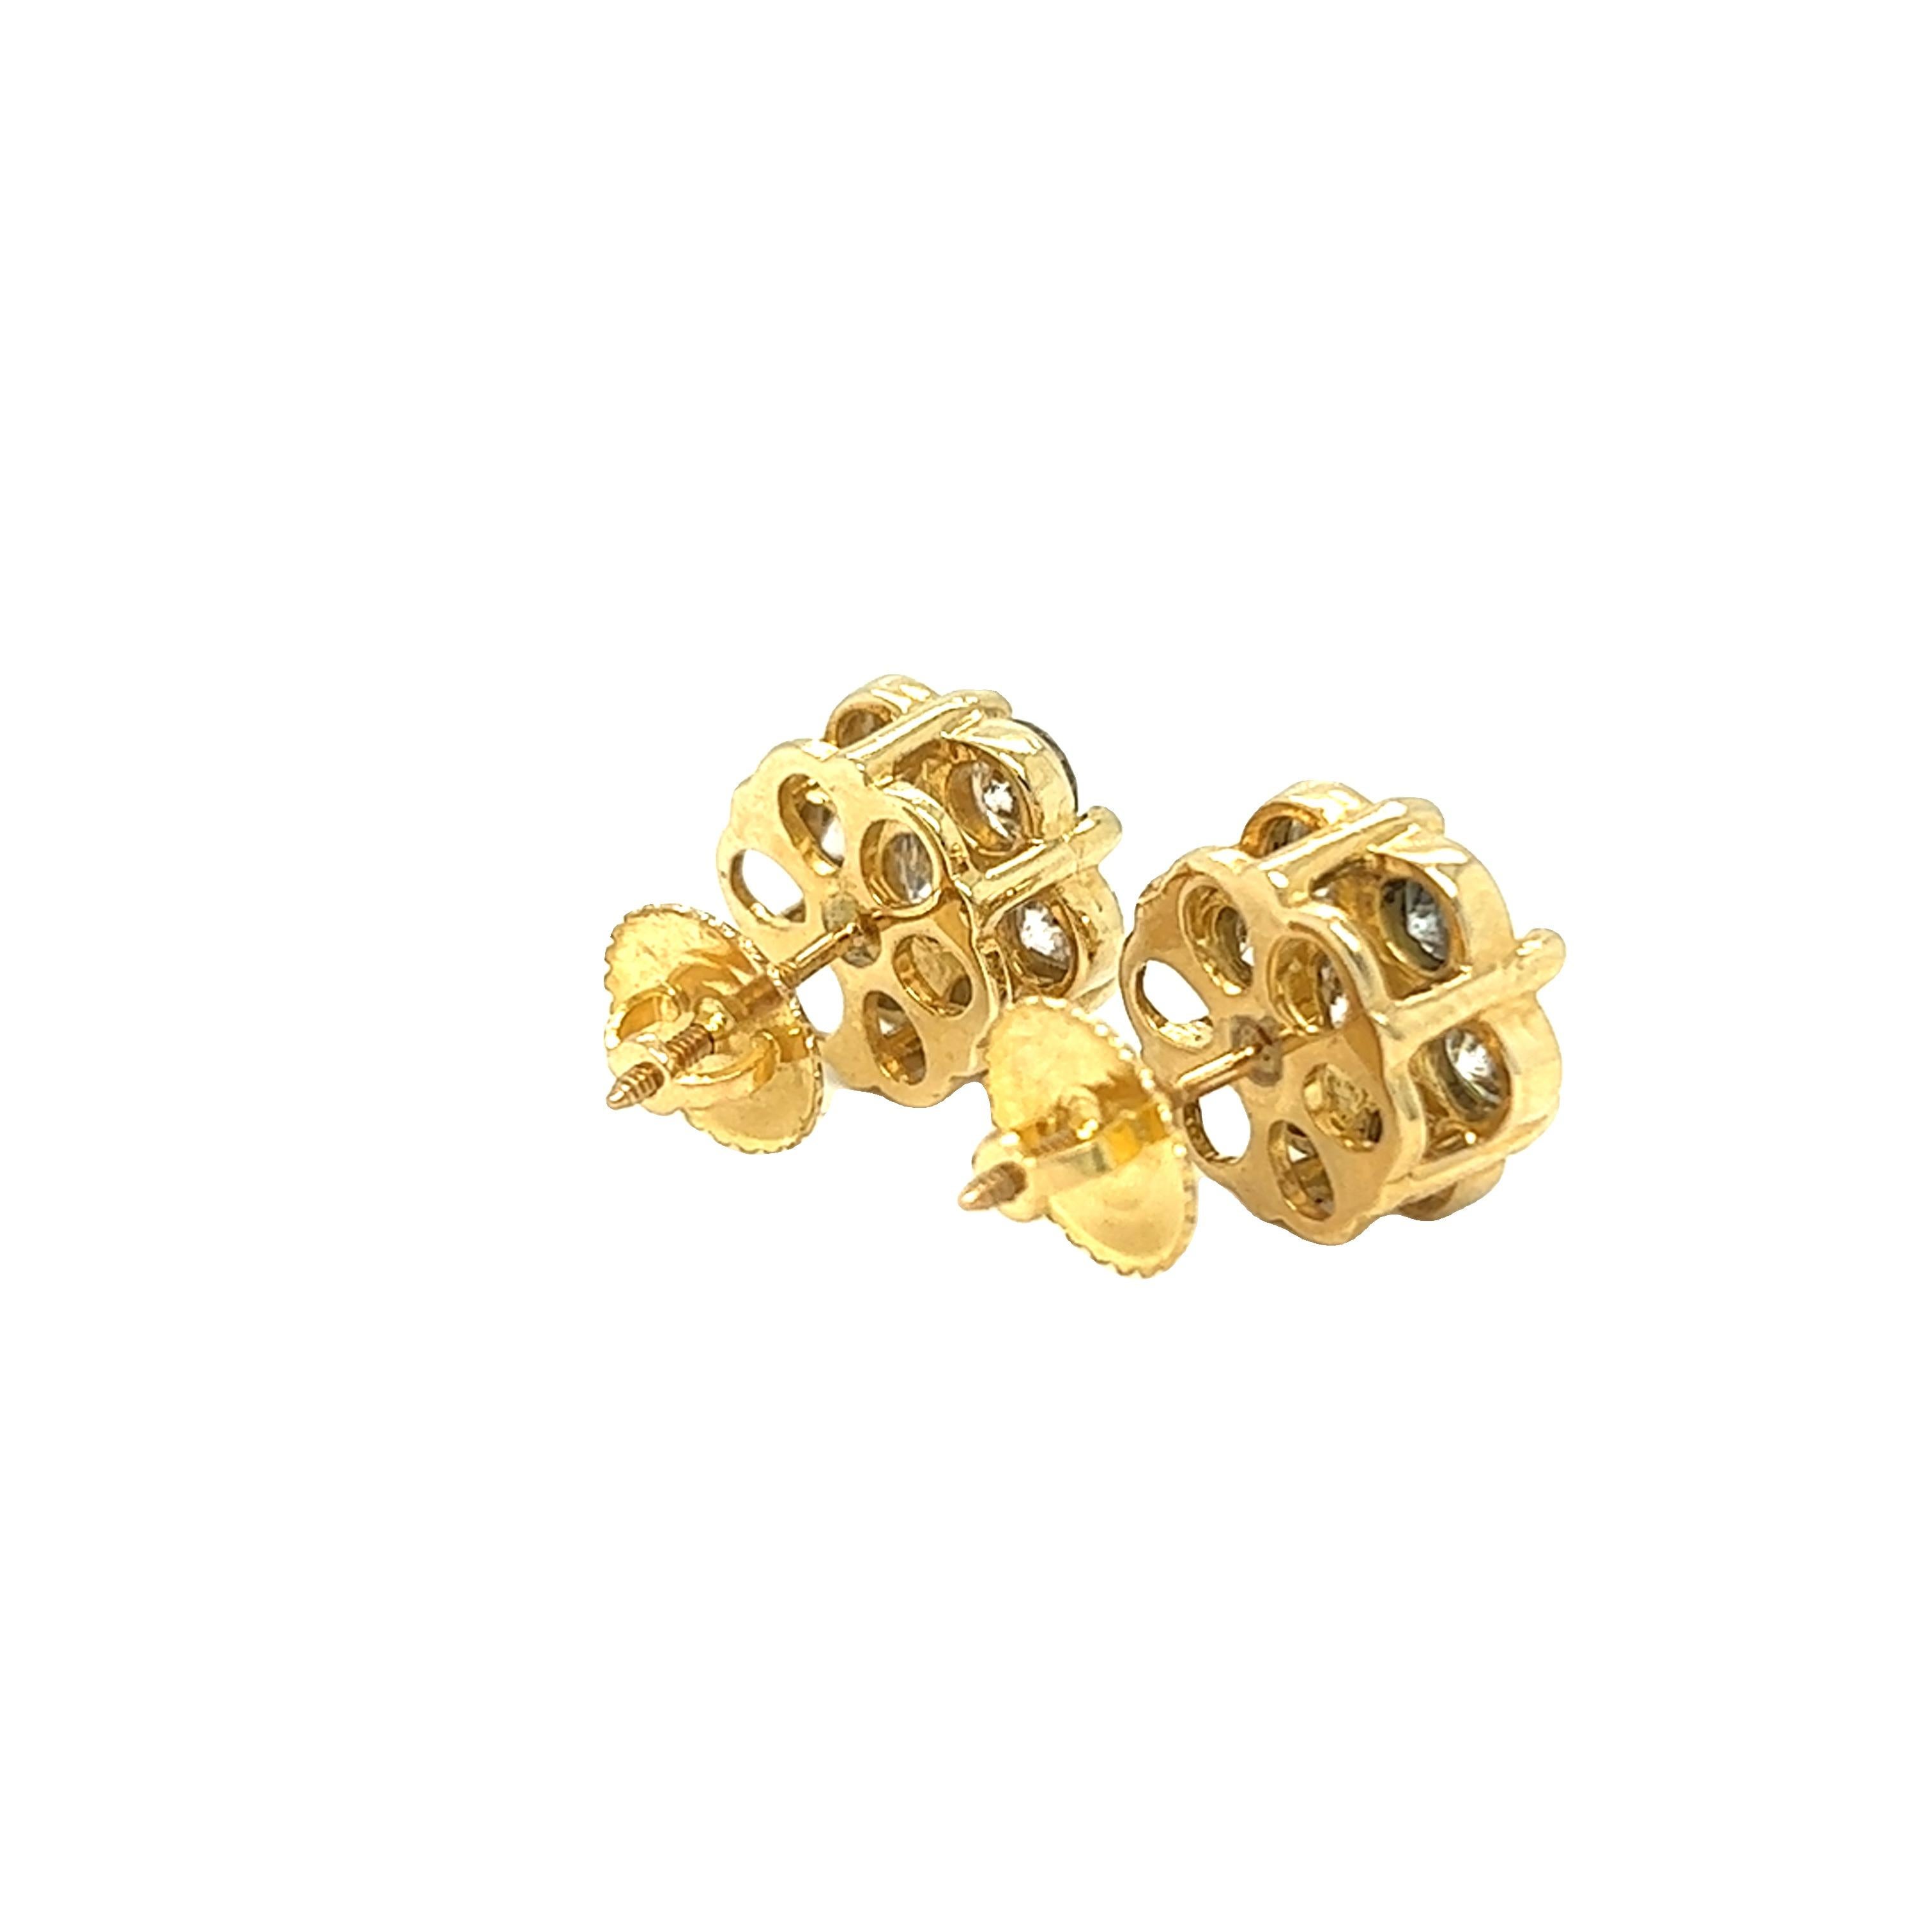 Round Cut 3.5 Carat Flower Cluster Round Diamond Earrings 14k Yellow Gold Screw Back For Sale